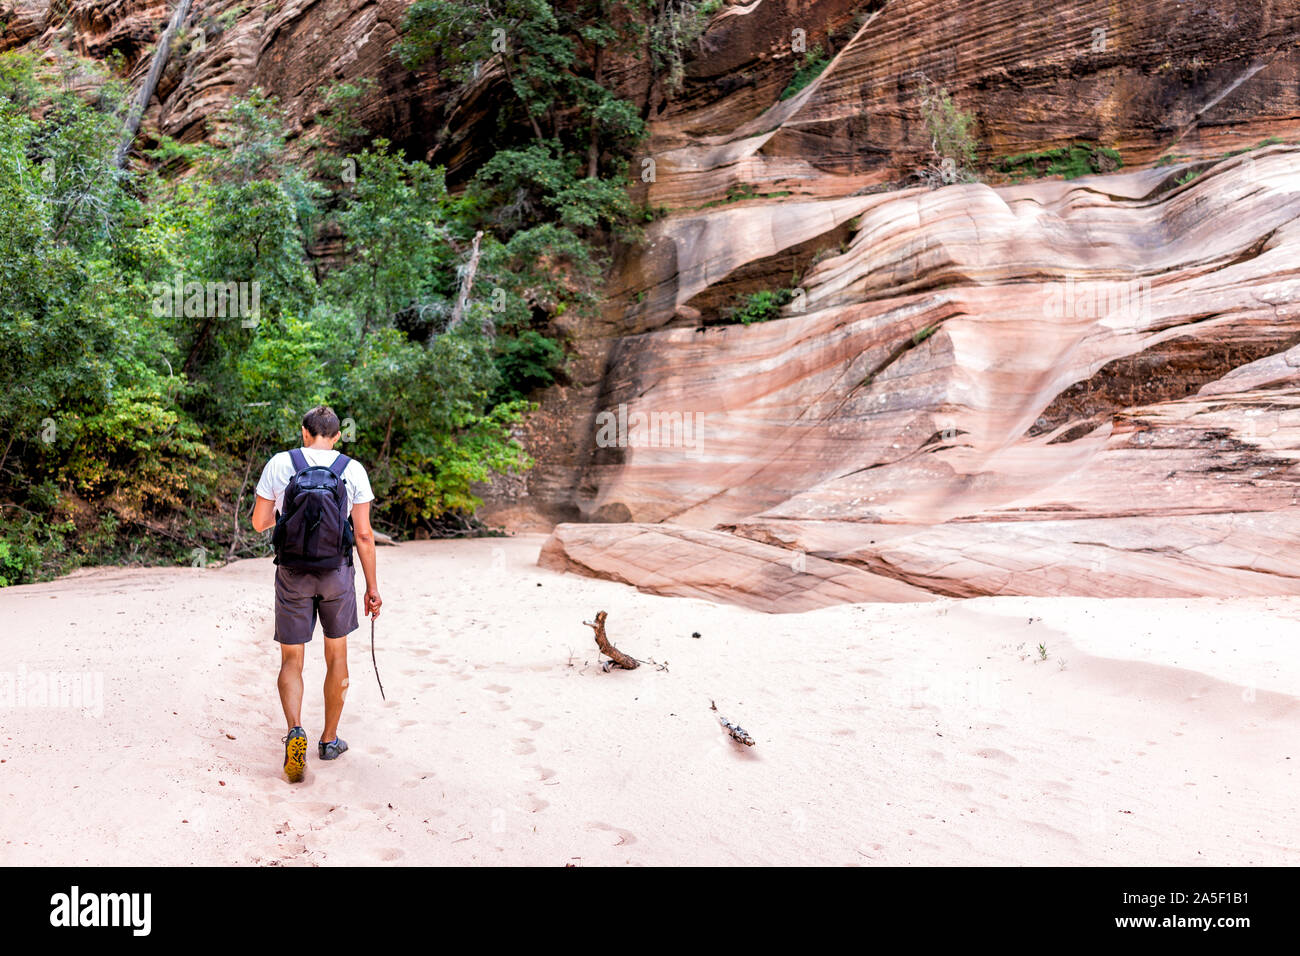 Zion National Park in Utah on Gifford Canyon trail sand and red rock formations with man hiker walking with backpack in summer Stock Photo